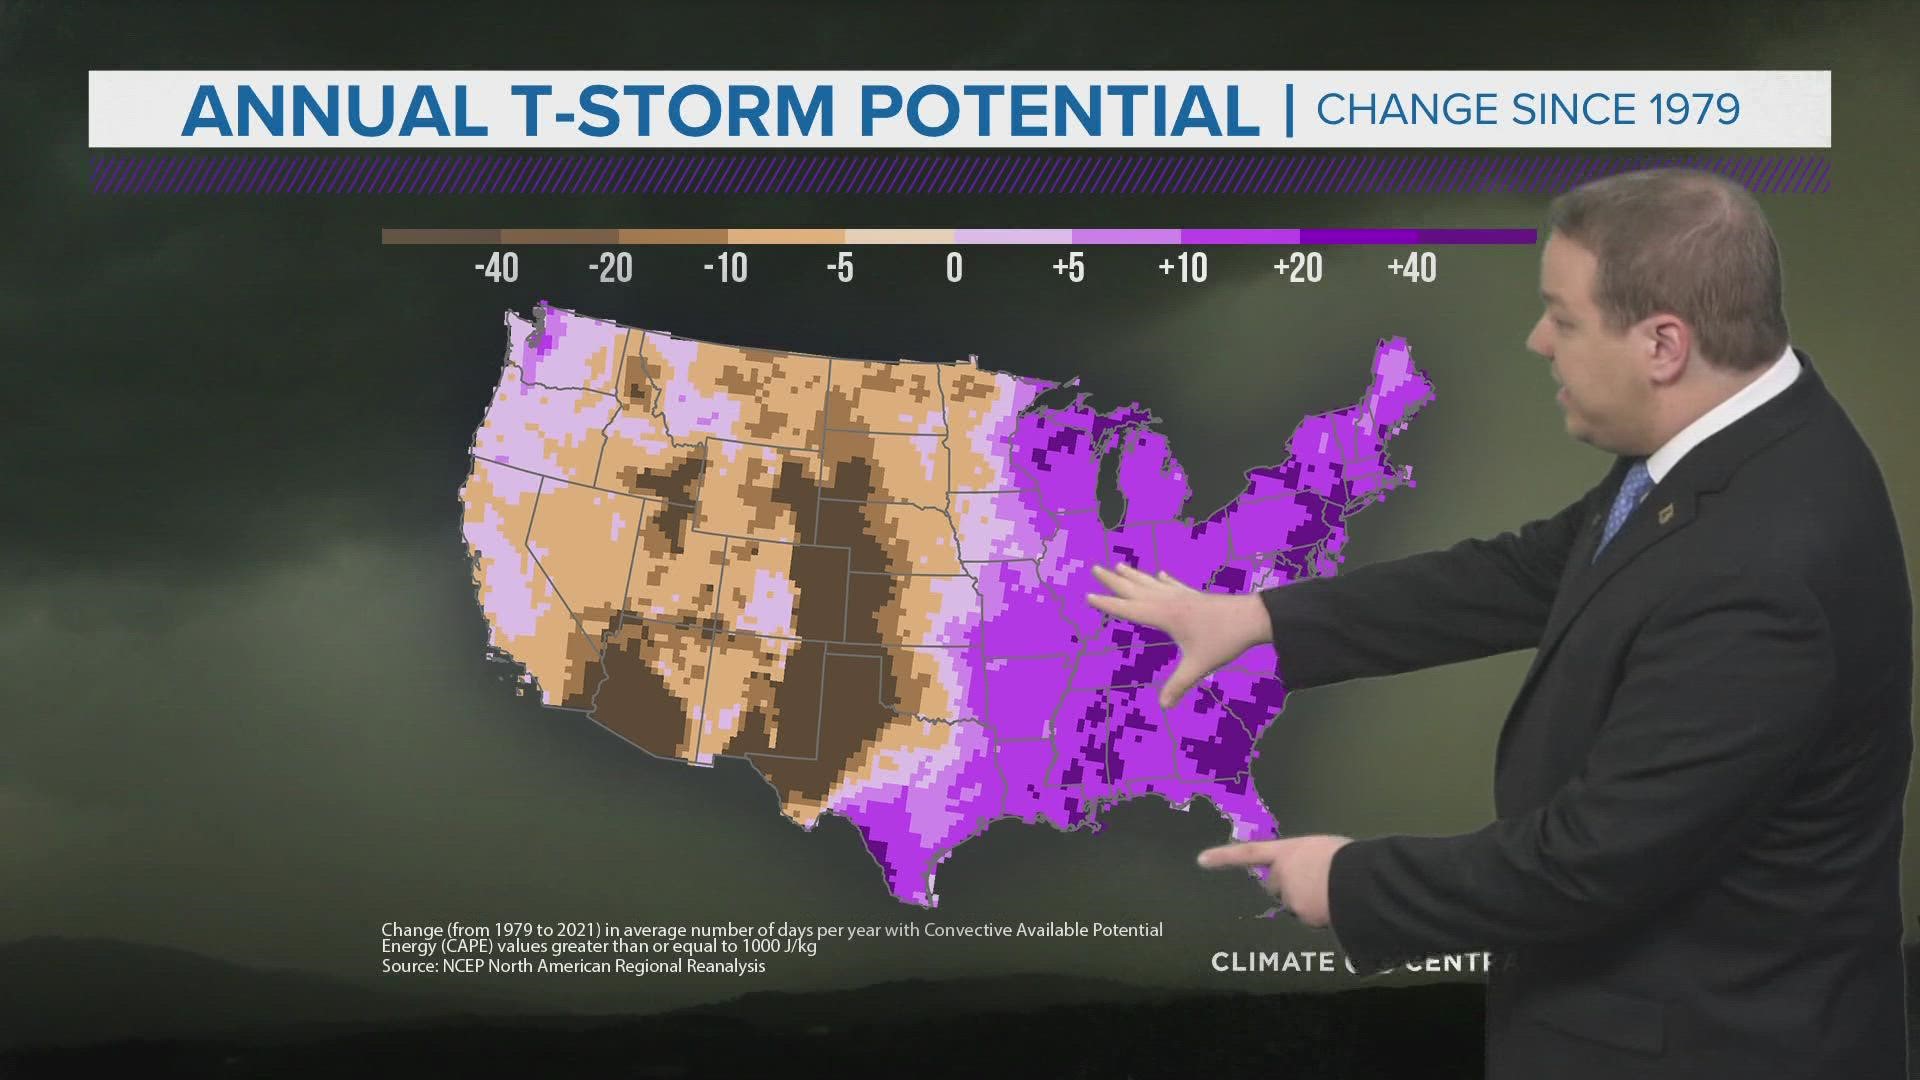 In the last 40 years, the area of the country most likely to see these storms has been changing.